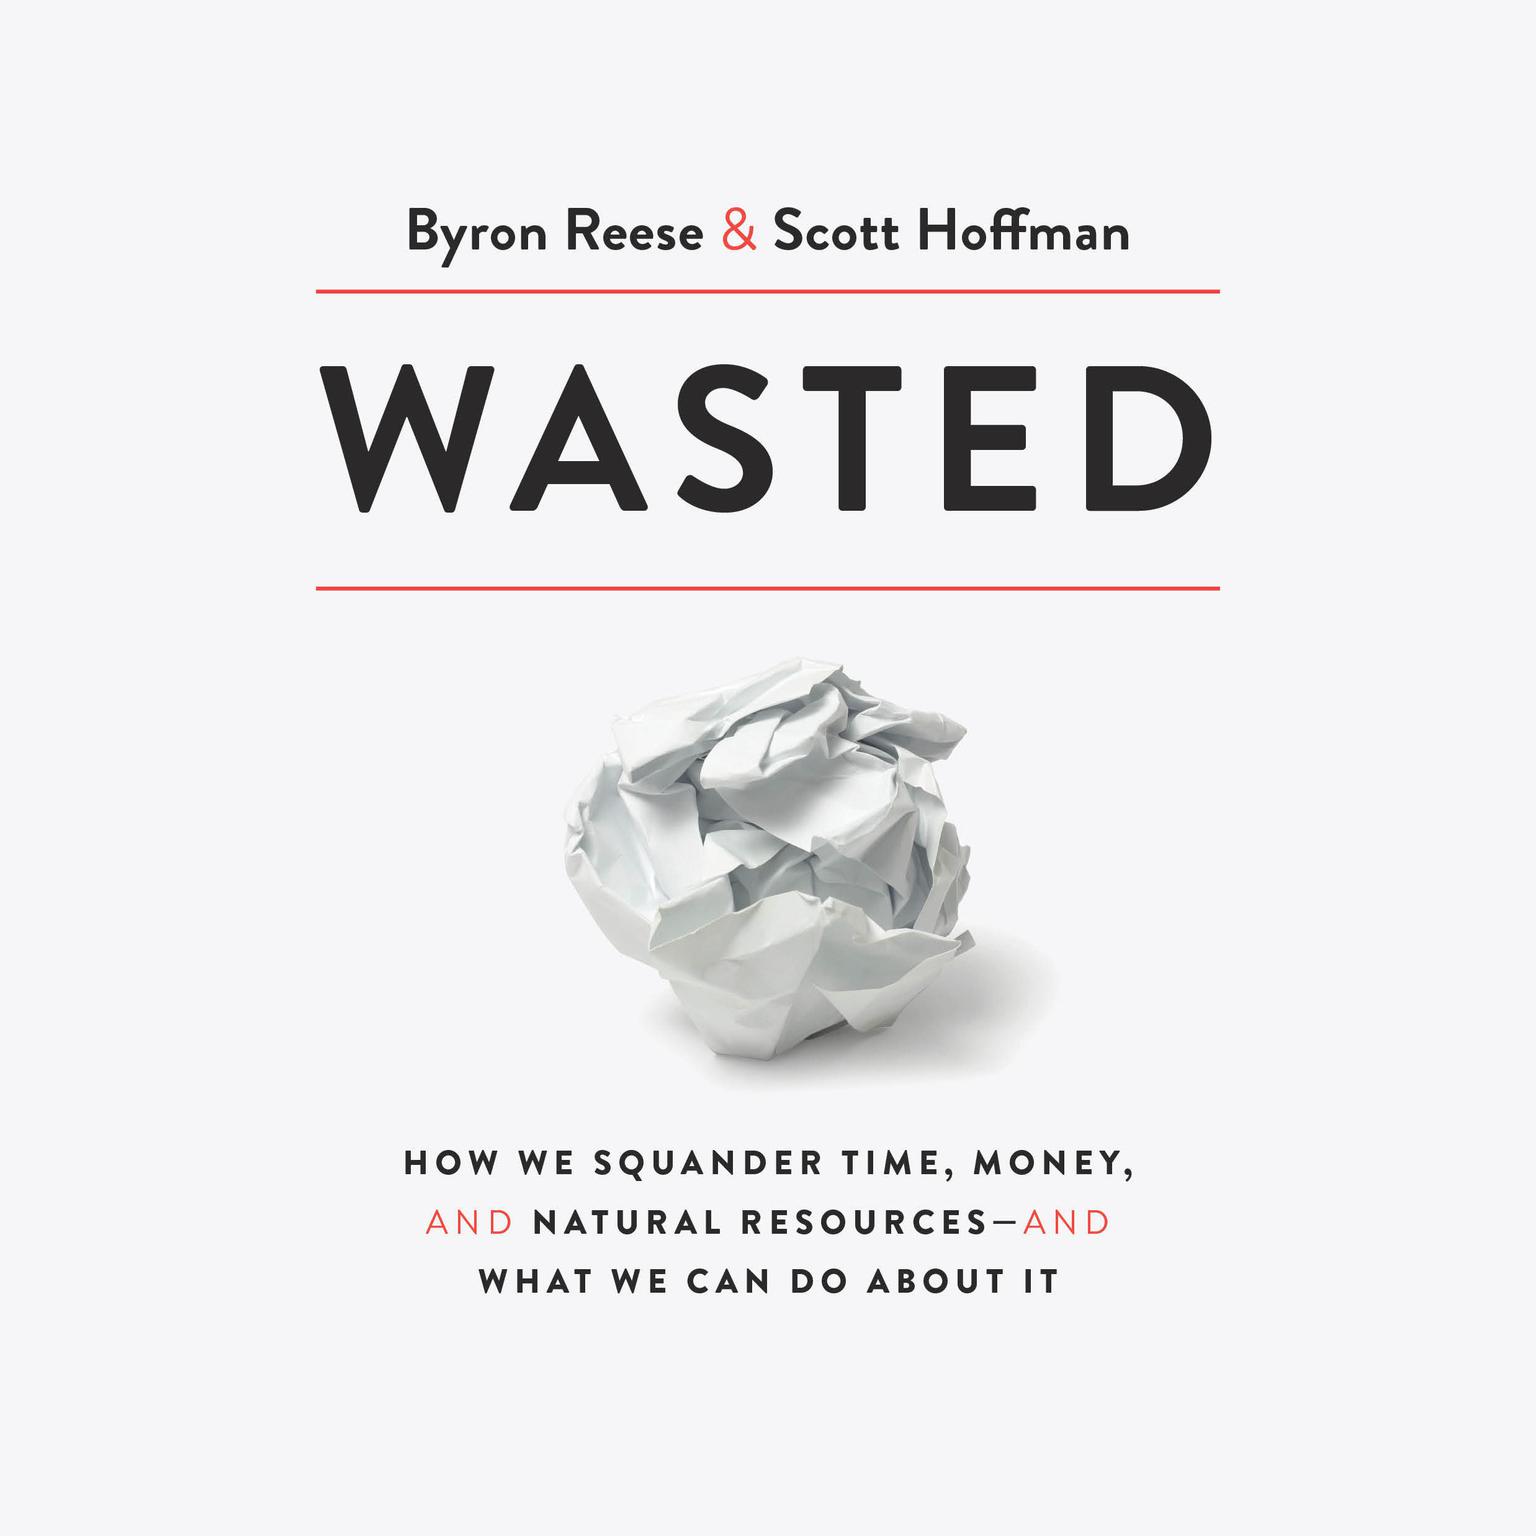 Wasted: How We Squander Time, Money, and Natural Resources-and What We Can Do About It Audiobook, by Byron Reese